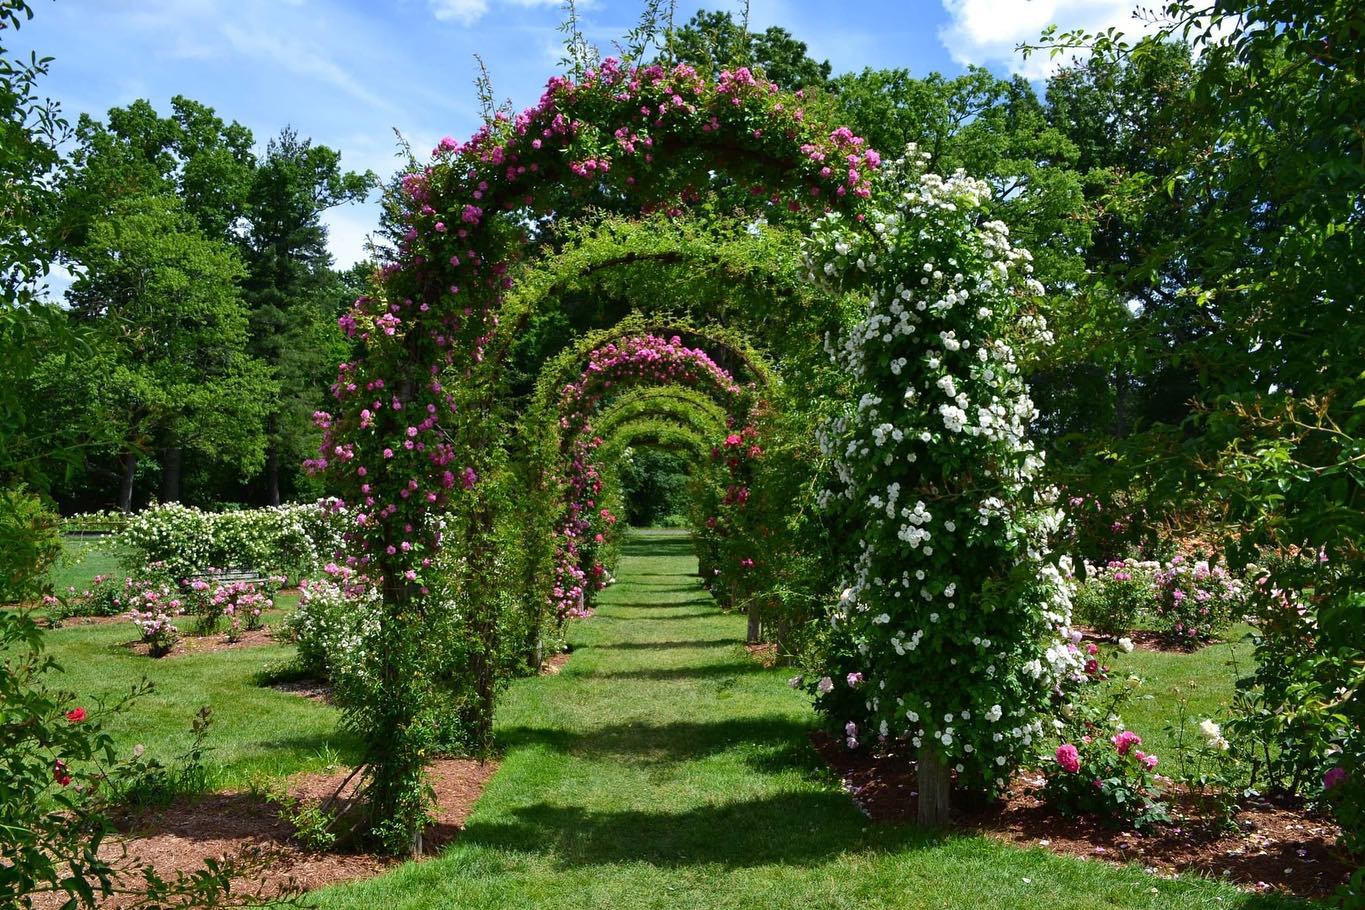 Front shot of archways made from climbing plants at a park.